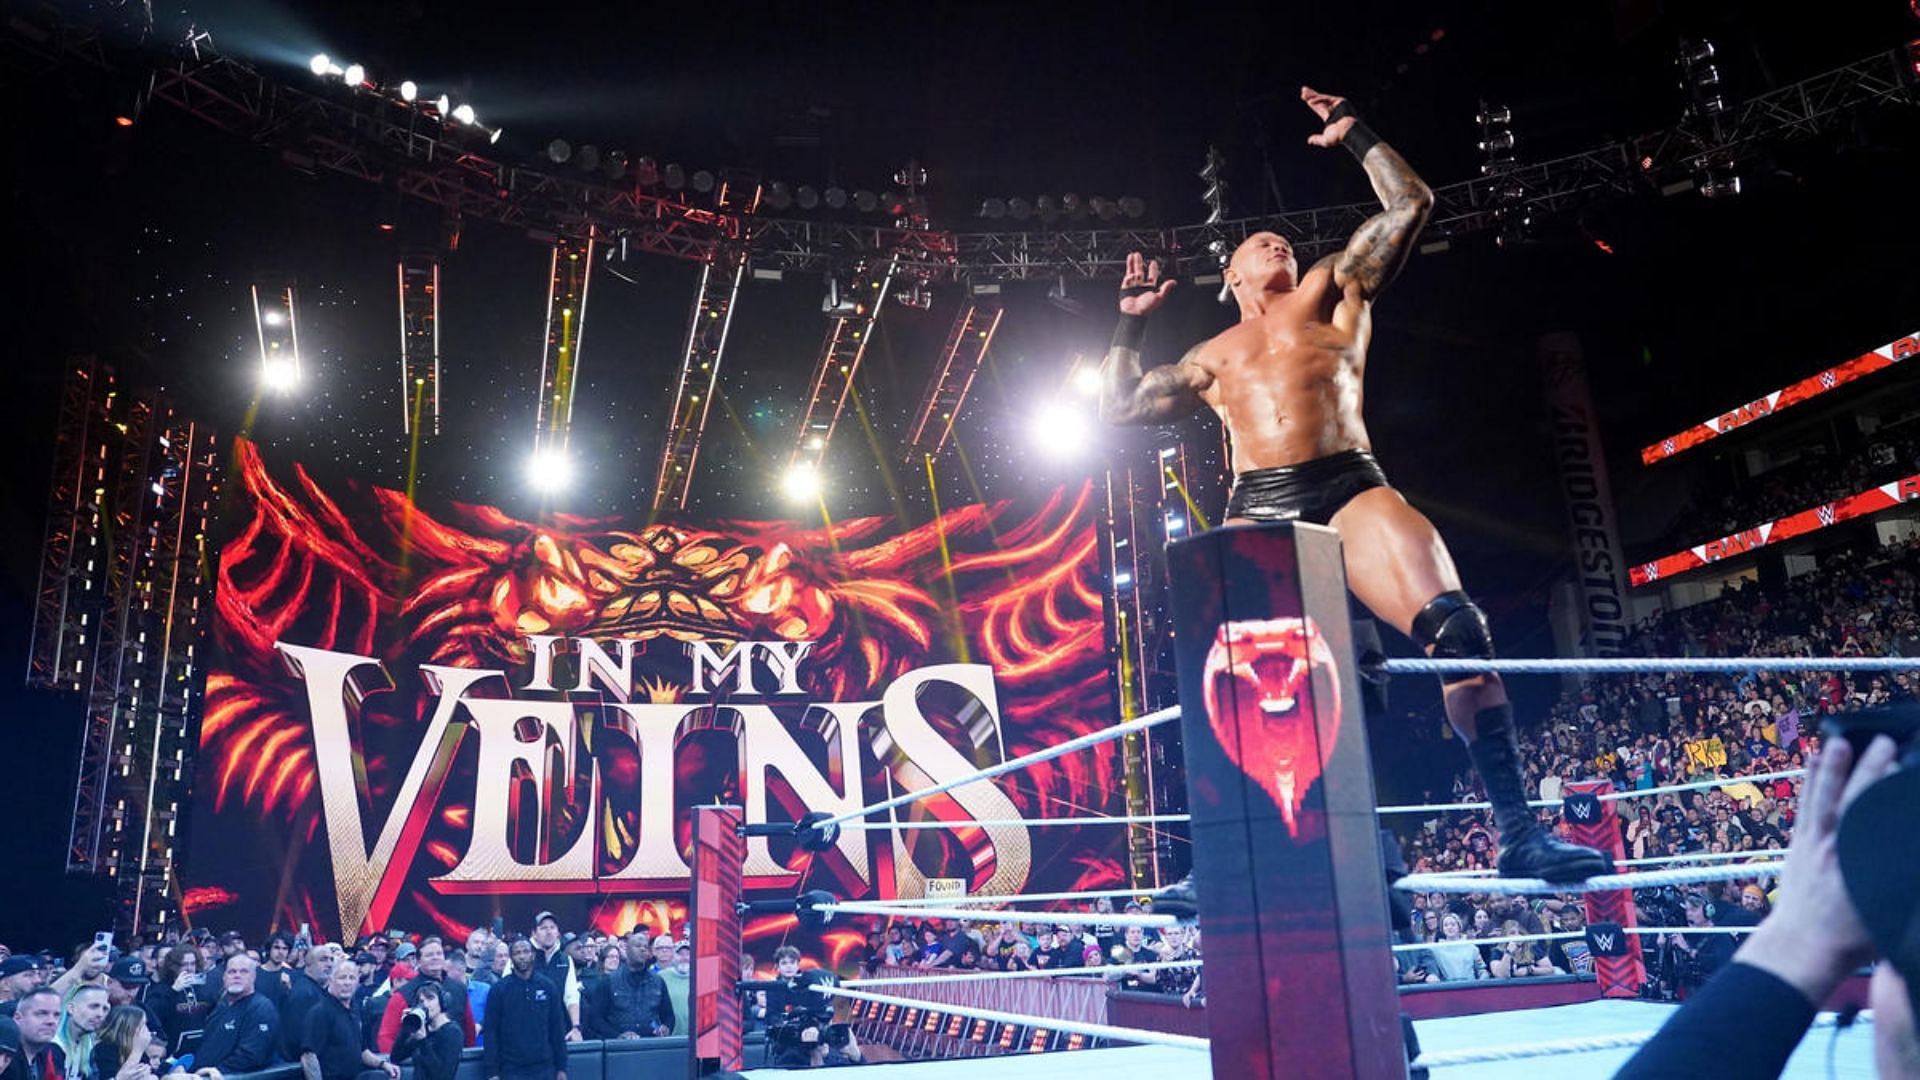 Randy Orton returned to WWE after a career-threatening back injury